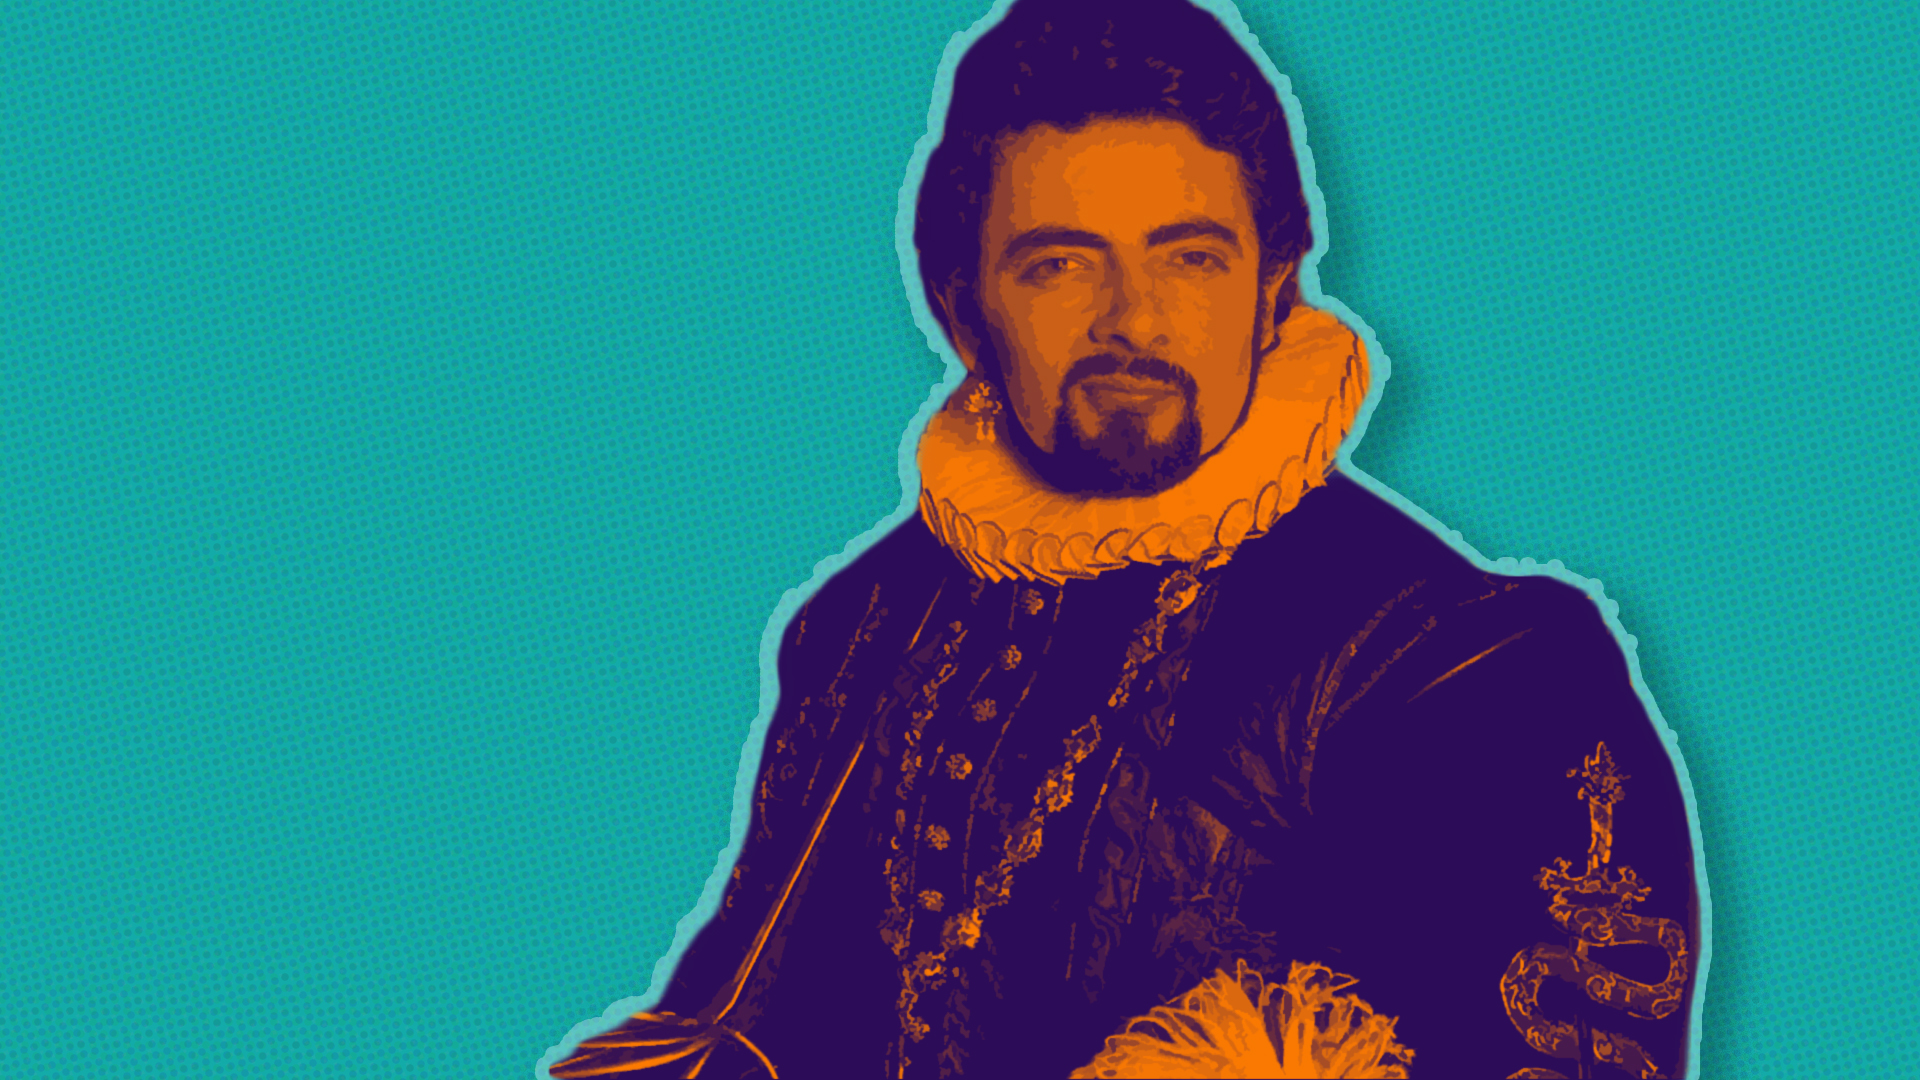 10 Fascinating Facts About The Iconic British Sitcom ‘Blackadder’ You Never Knew